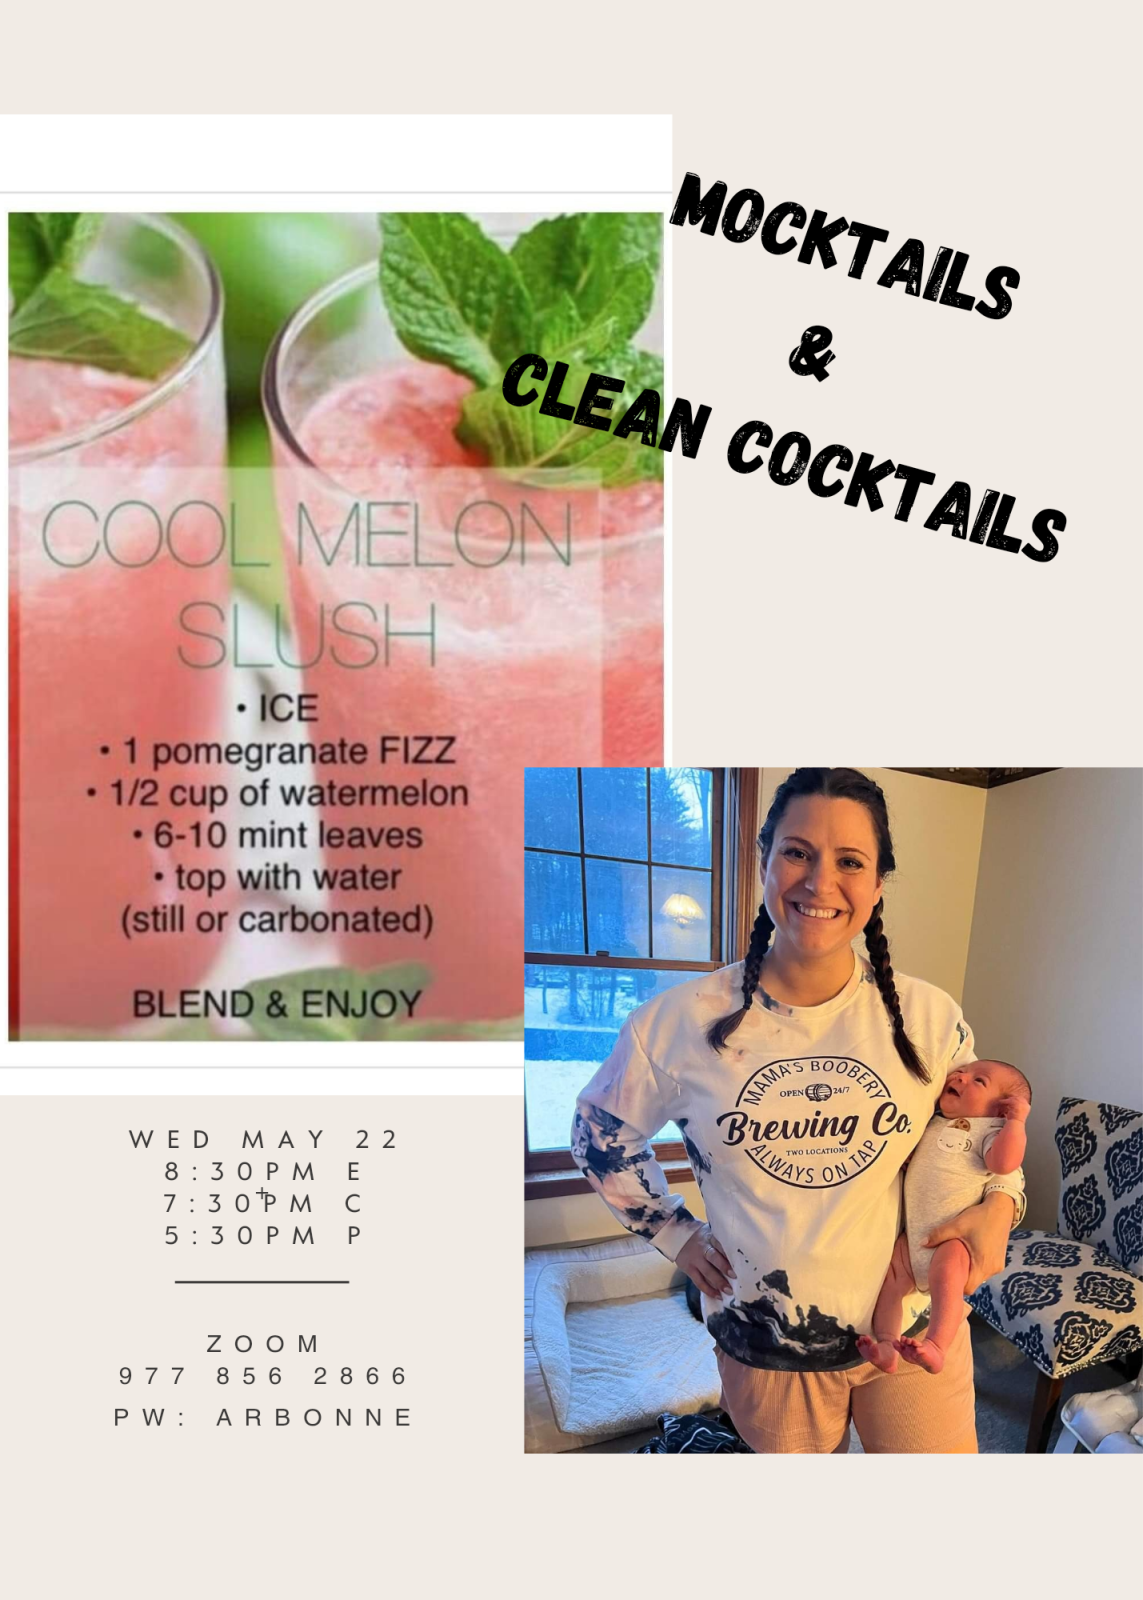 Mocktails for Memorial Day - May 22 (Guest Event)